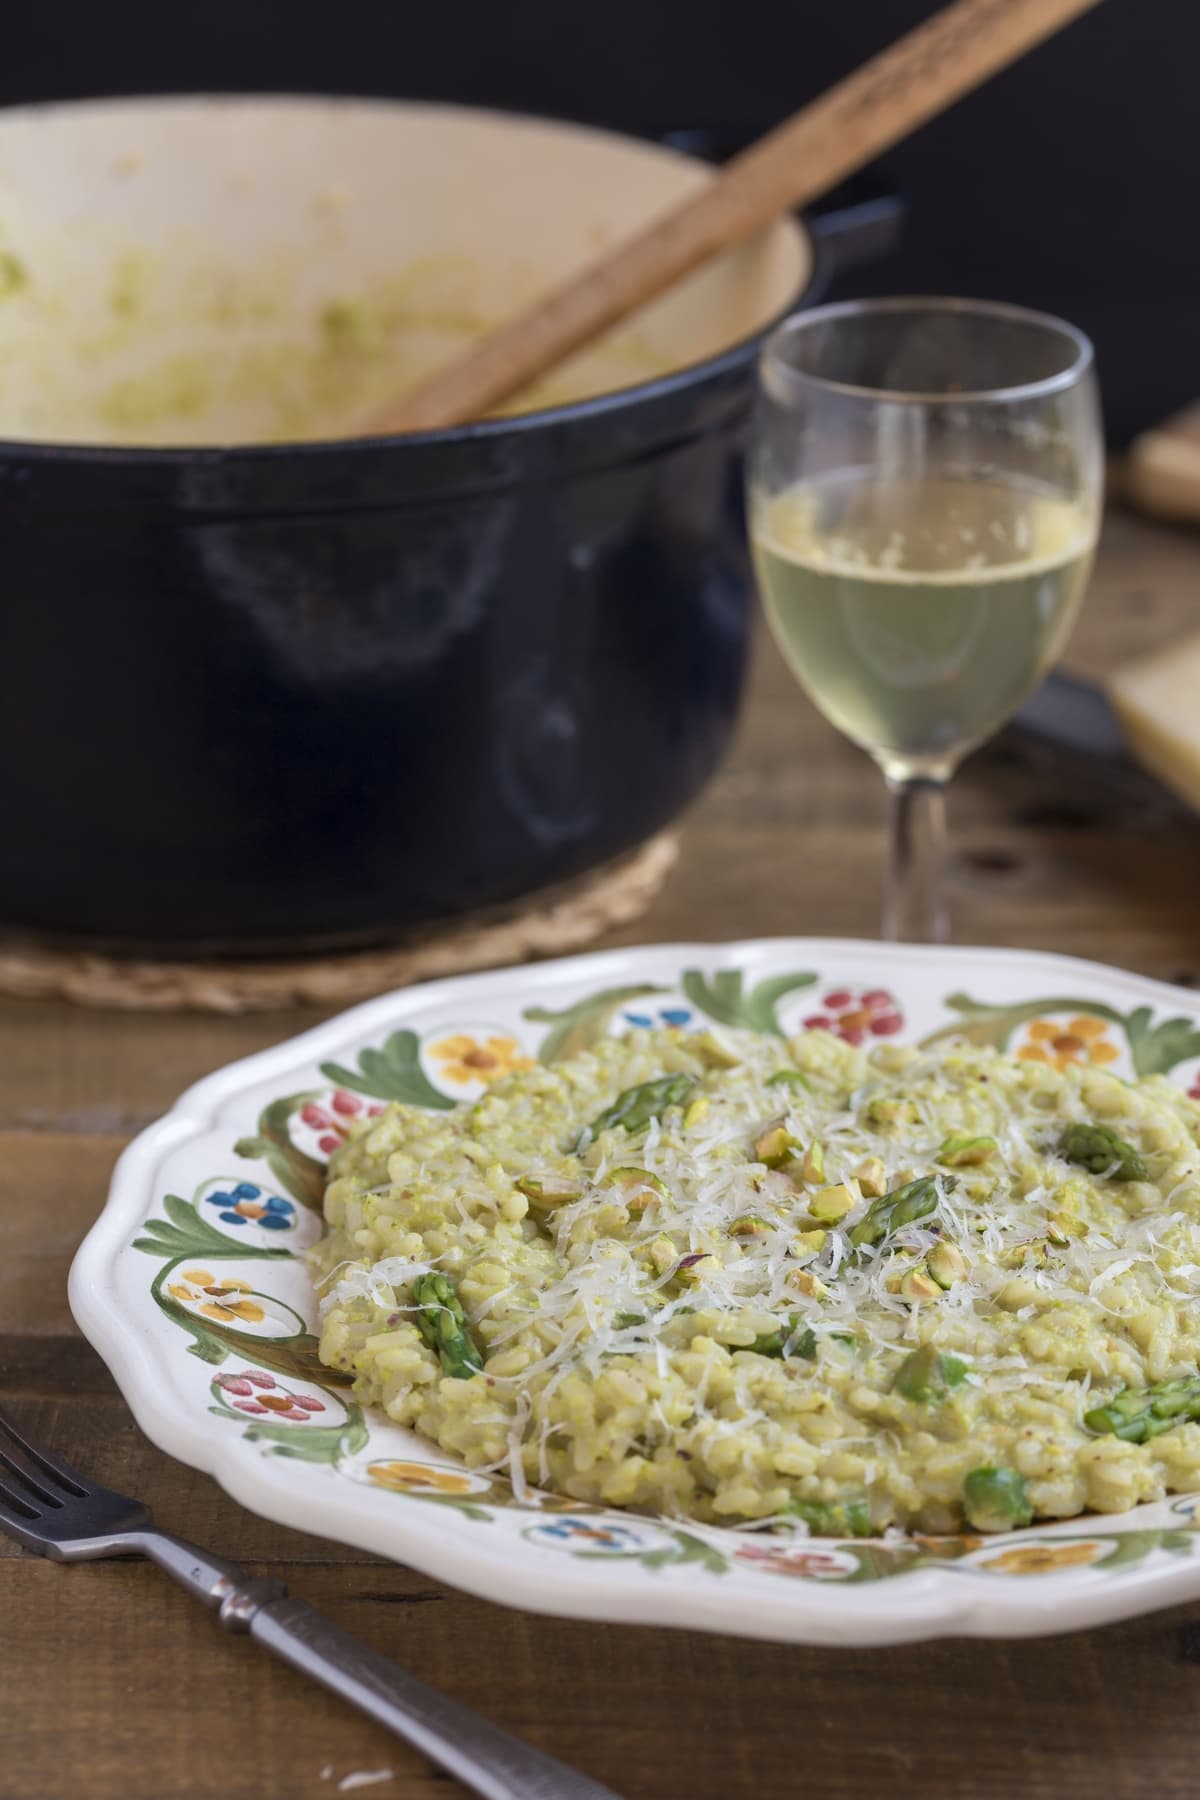 A plate of asparagus risotto nest to a Dutch oven and a glass of white wine.